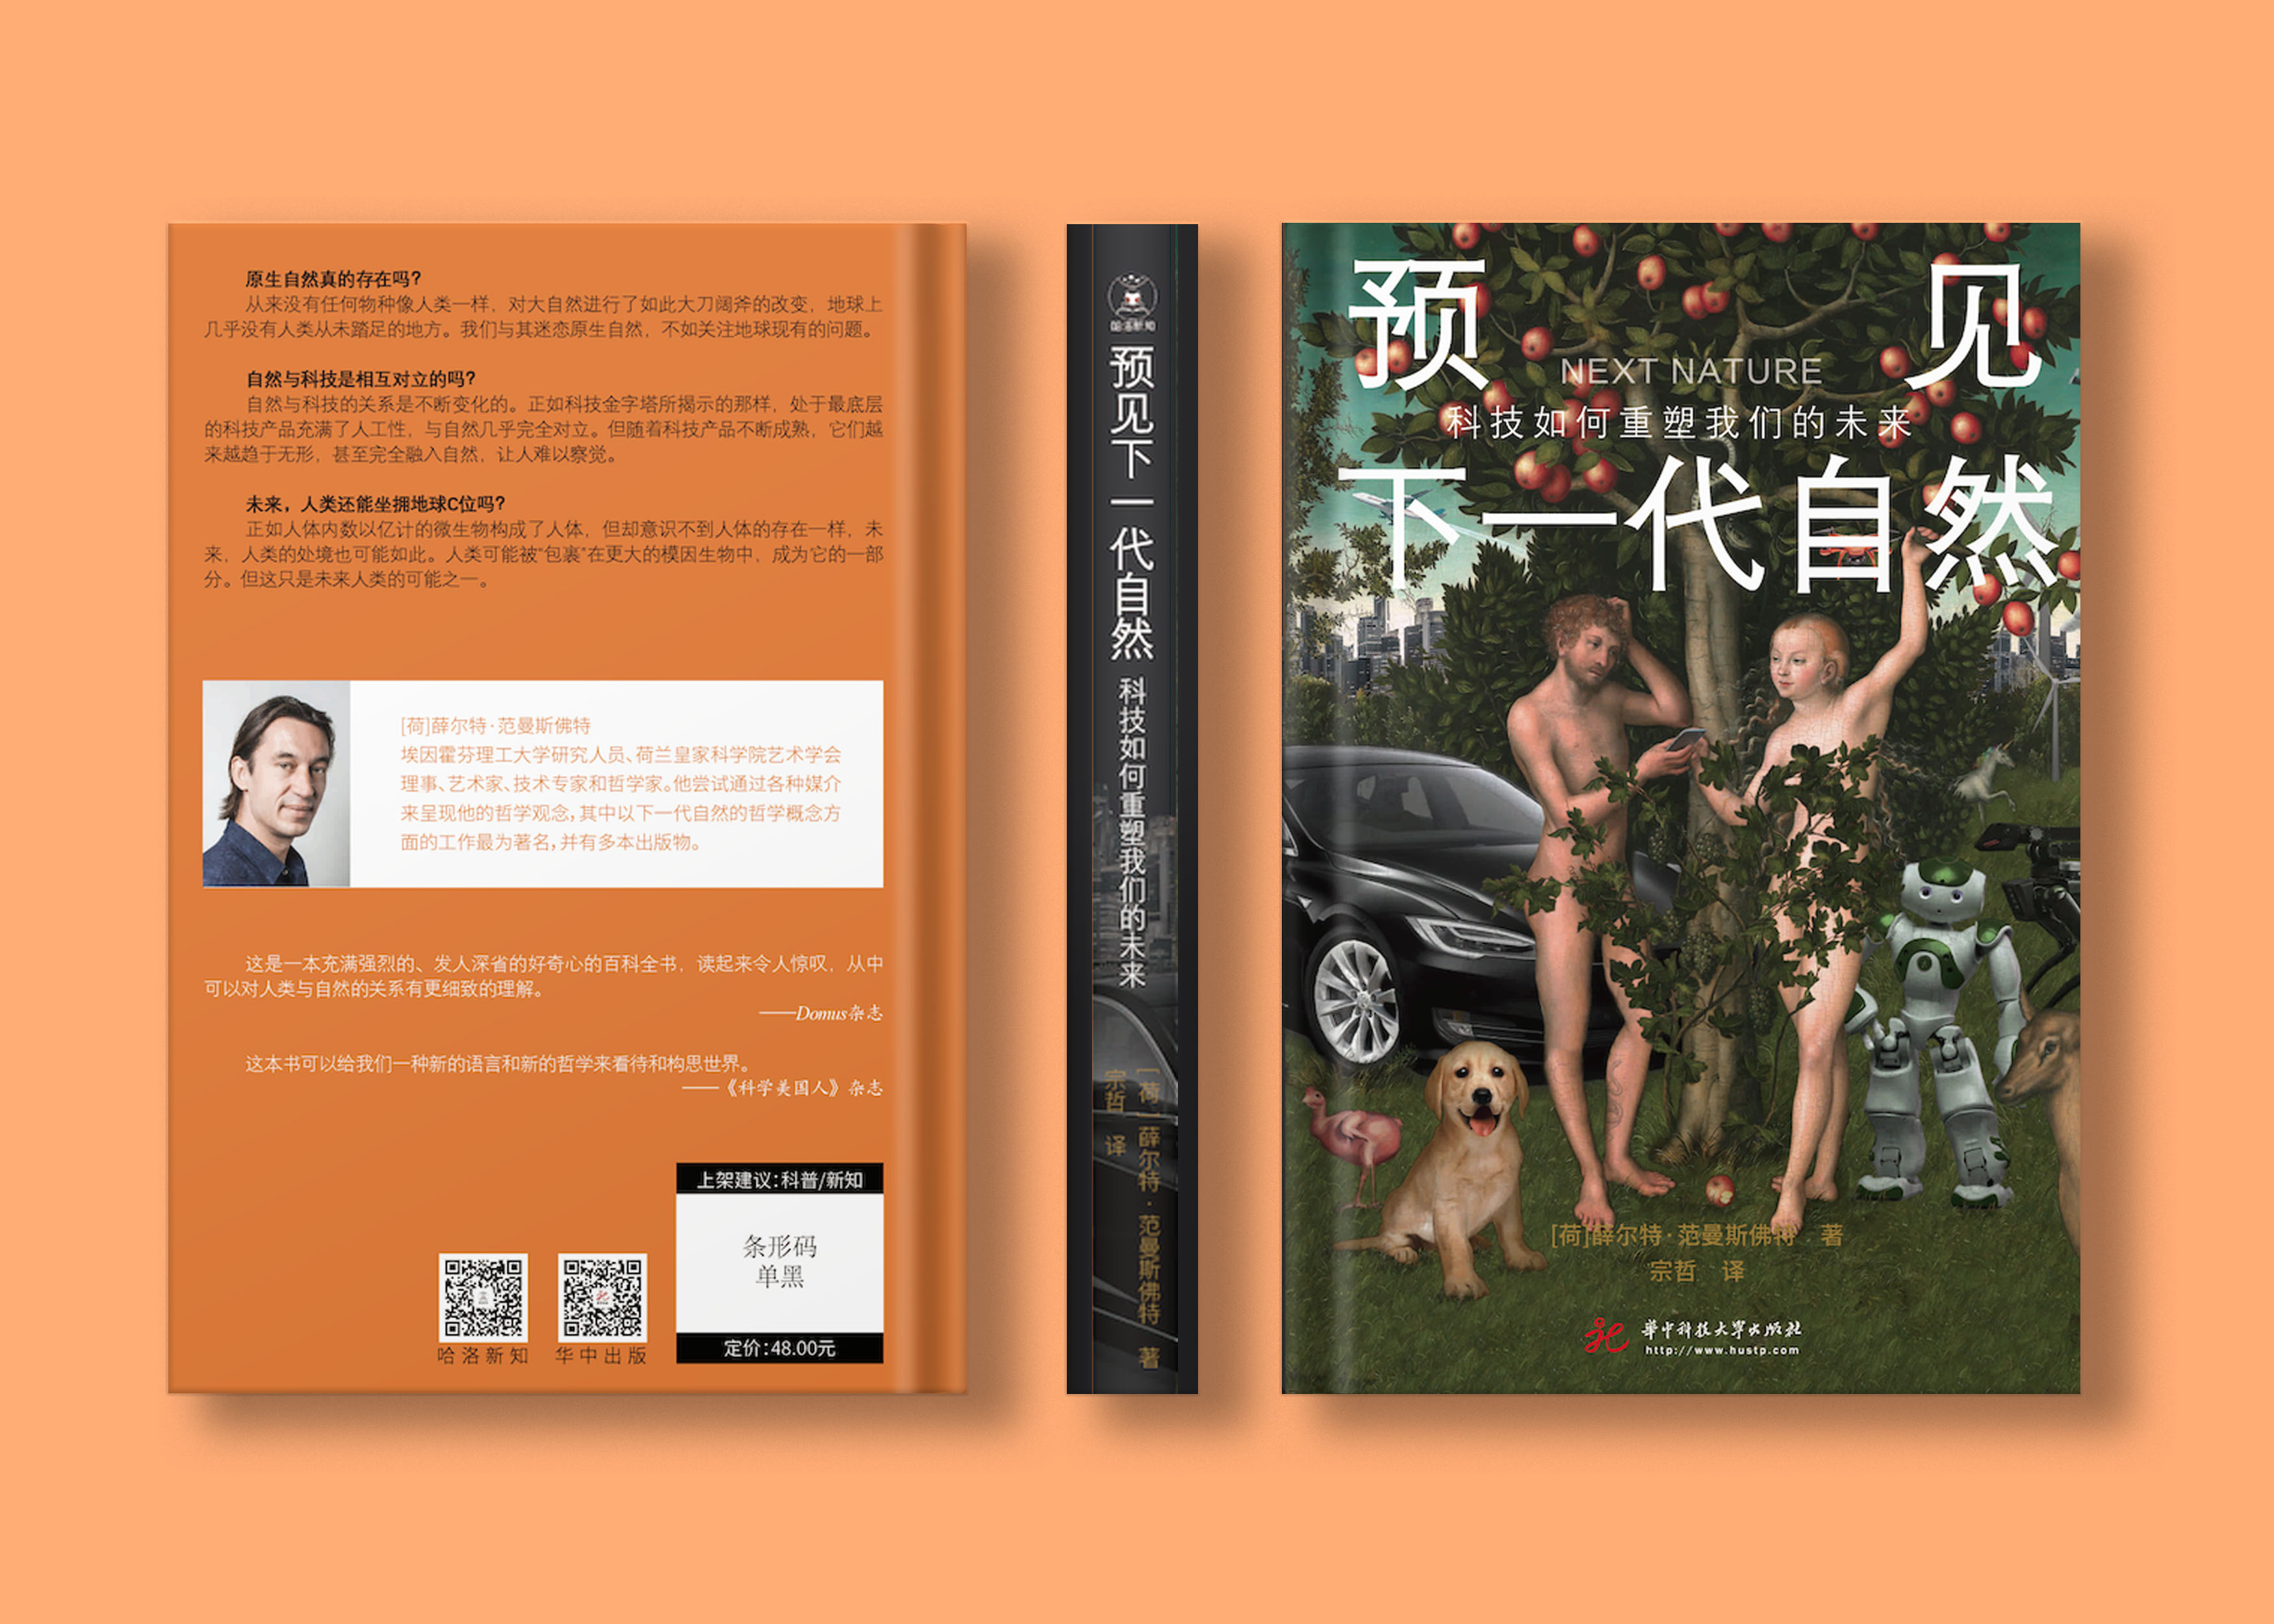 Visual of The Next Nature book is now available in Chinese